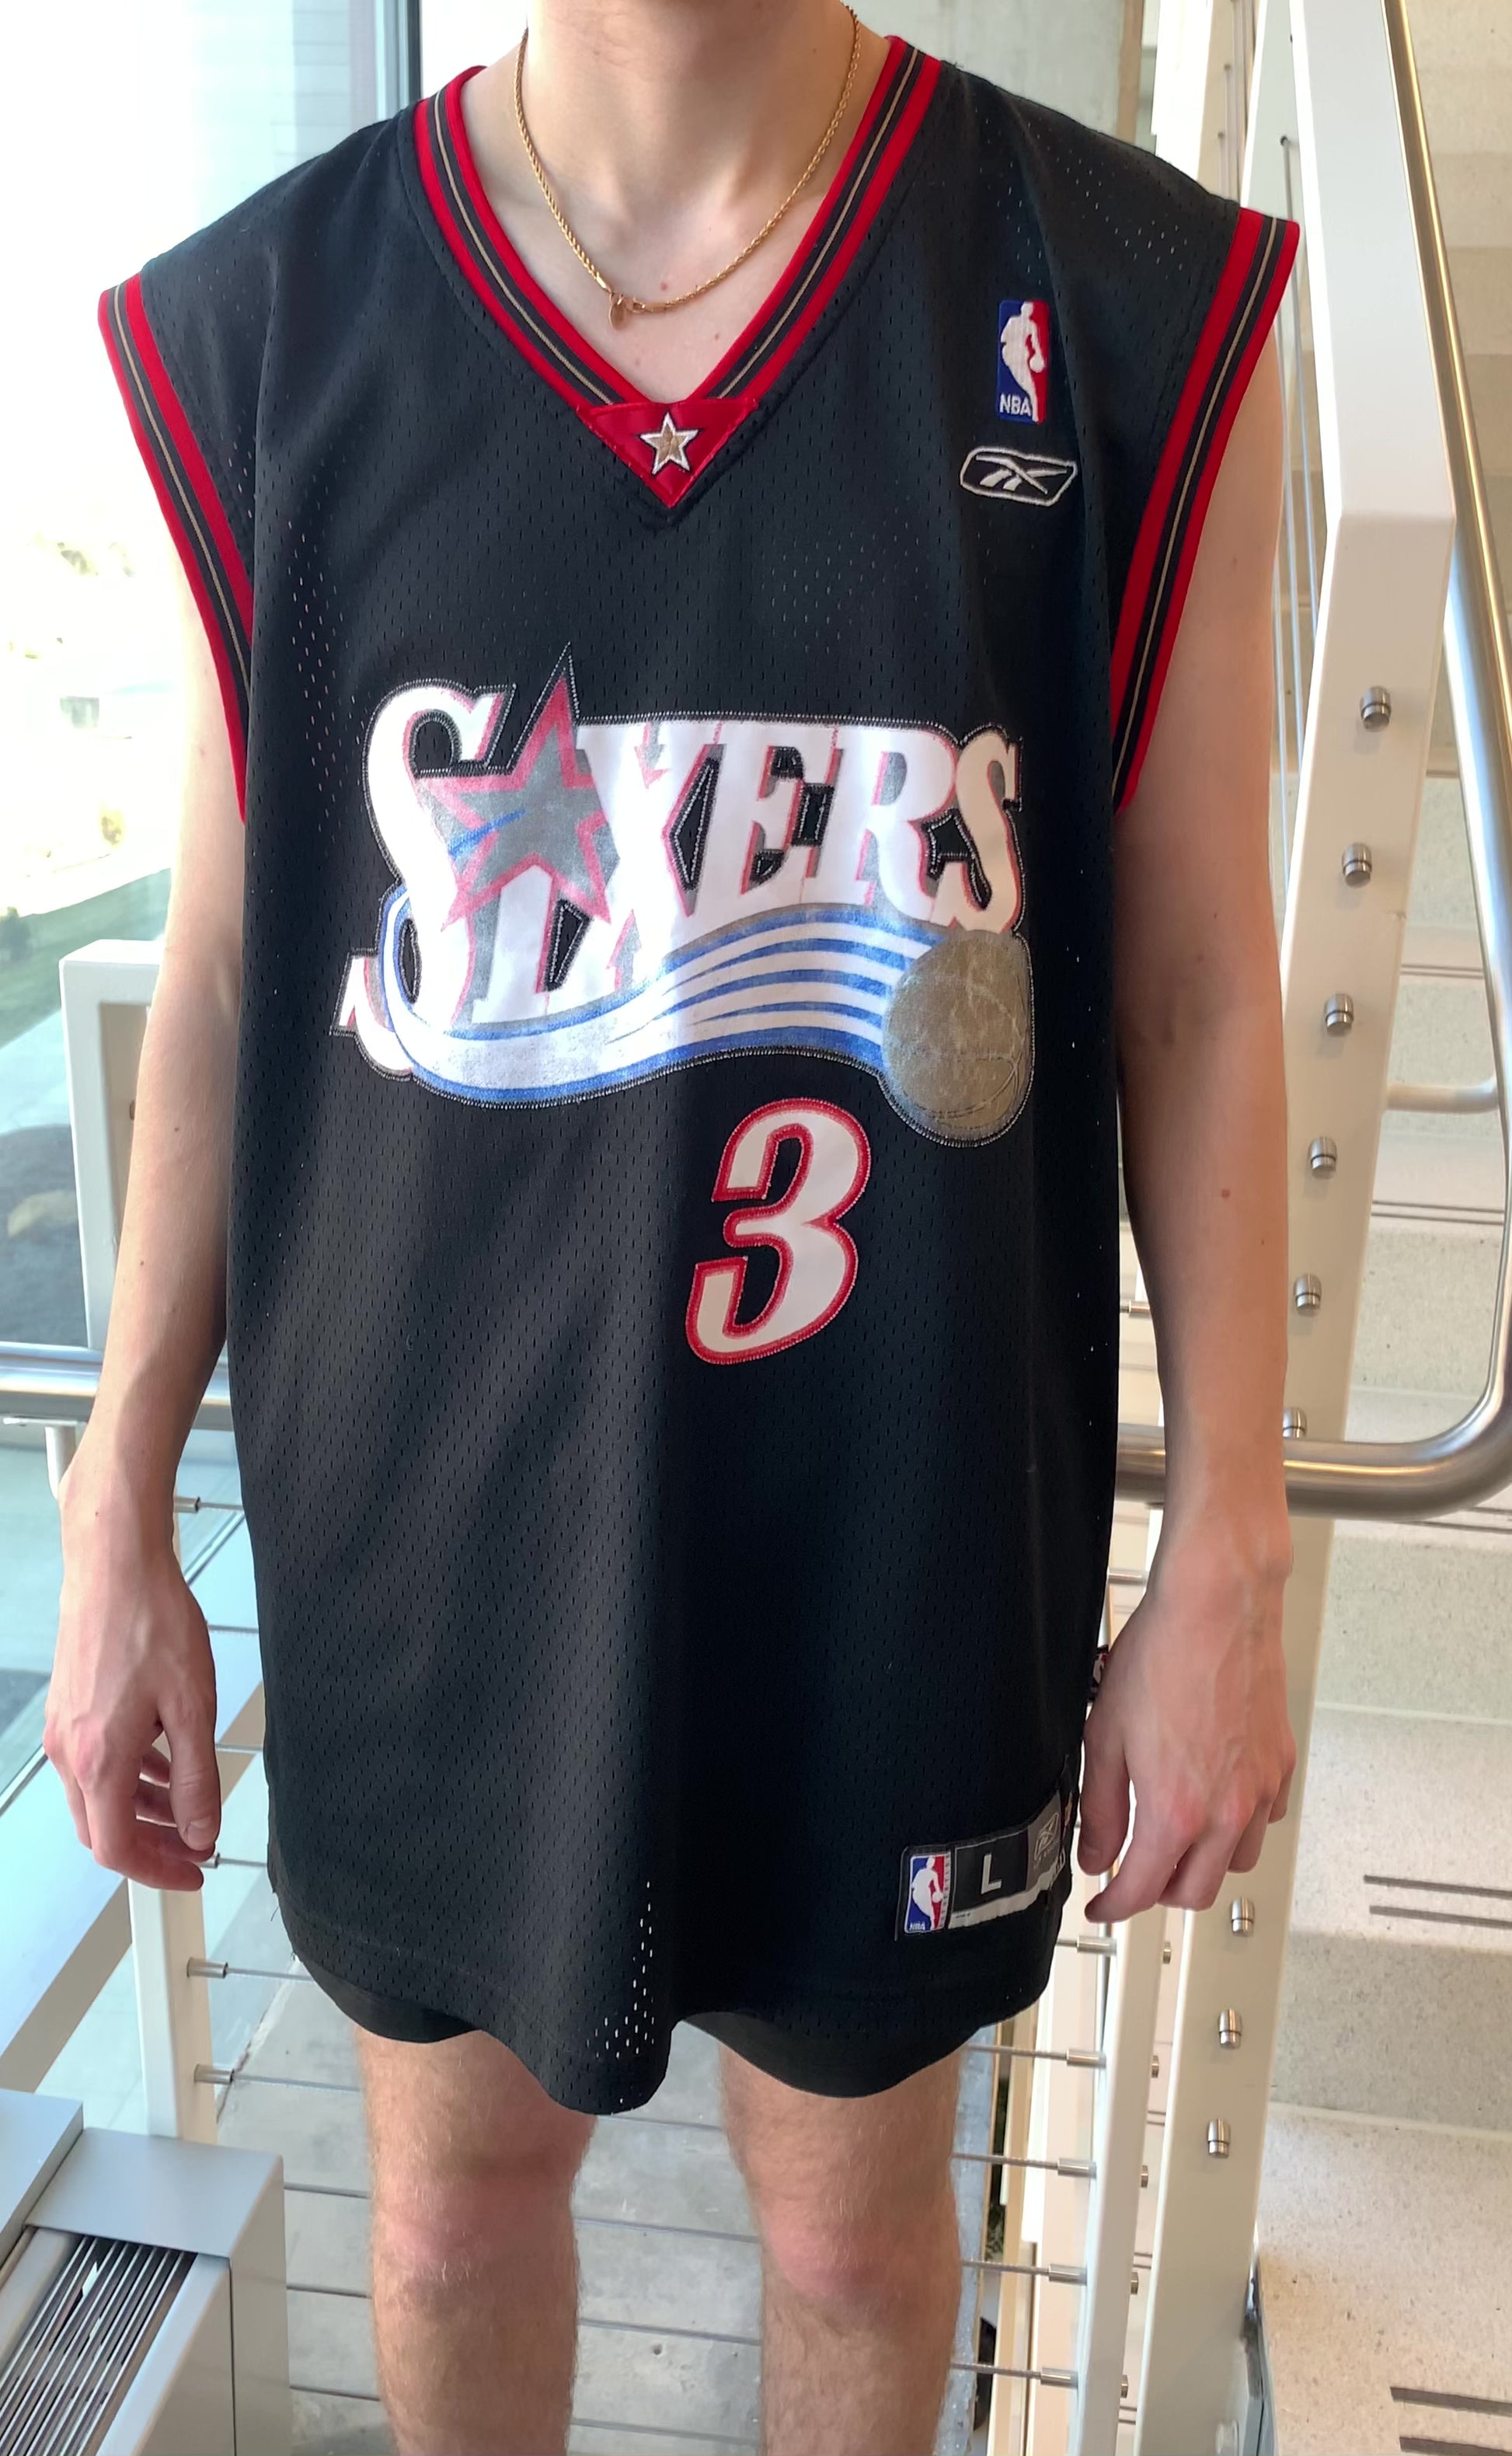 real allen iverson jersey